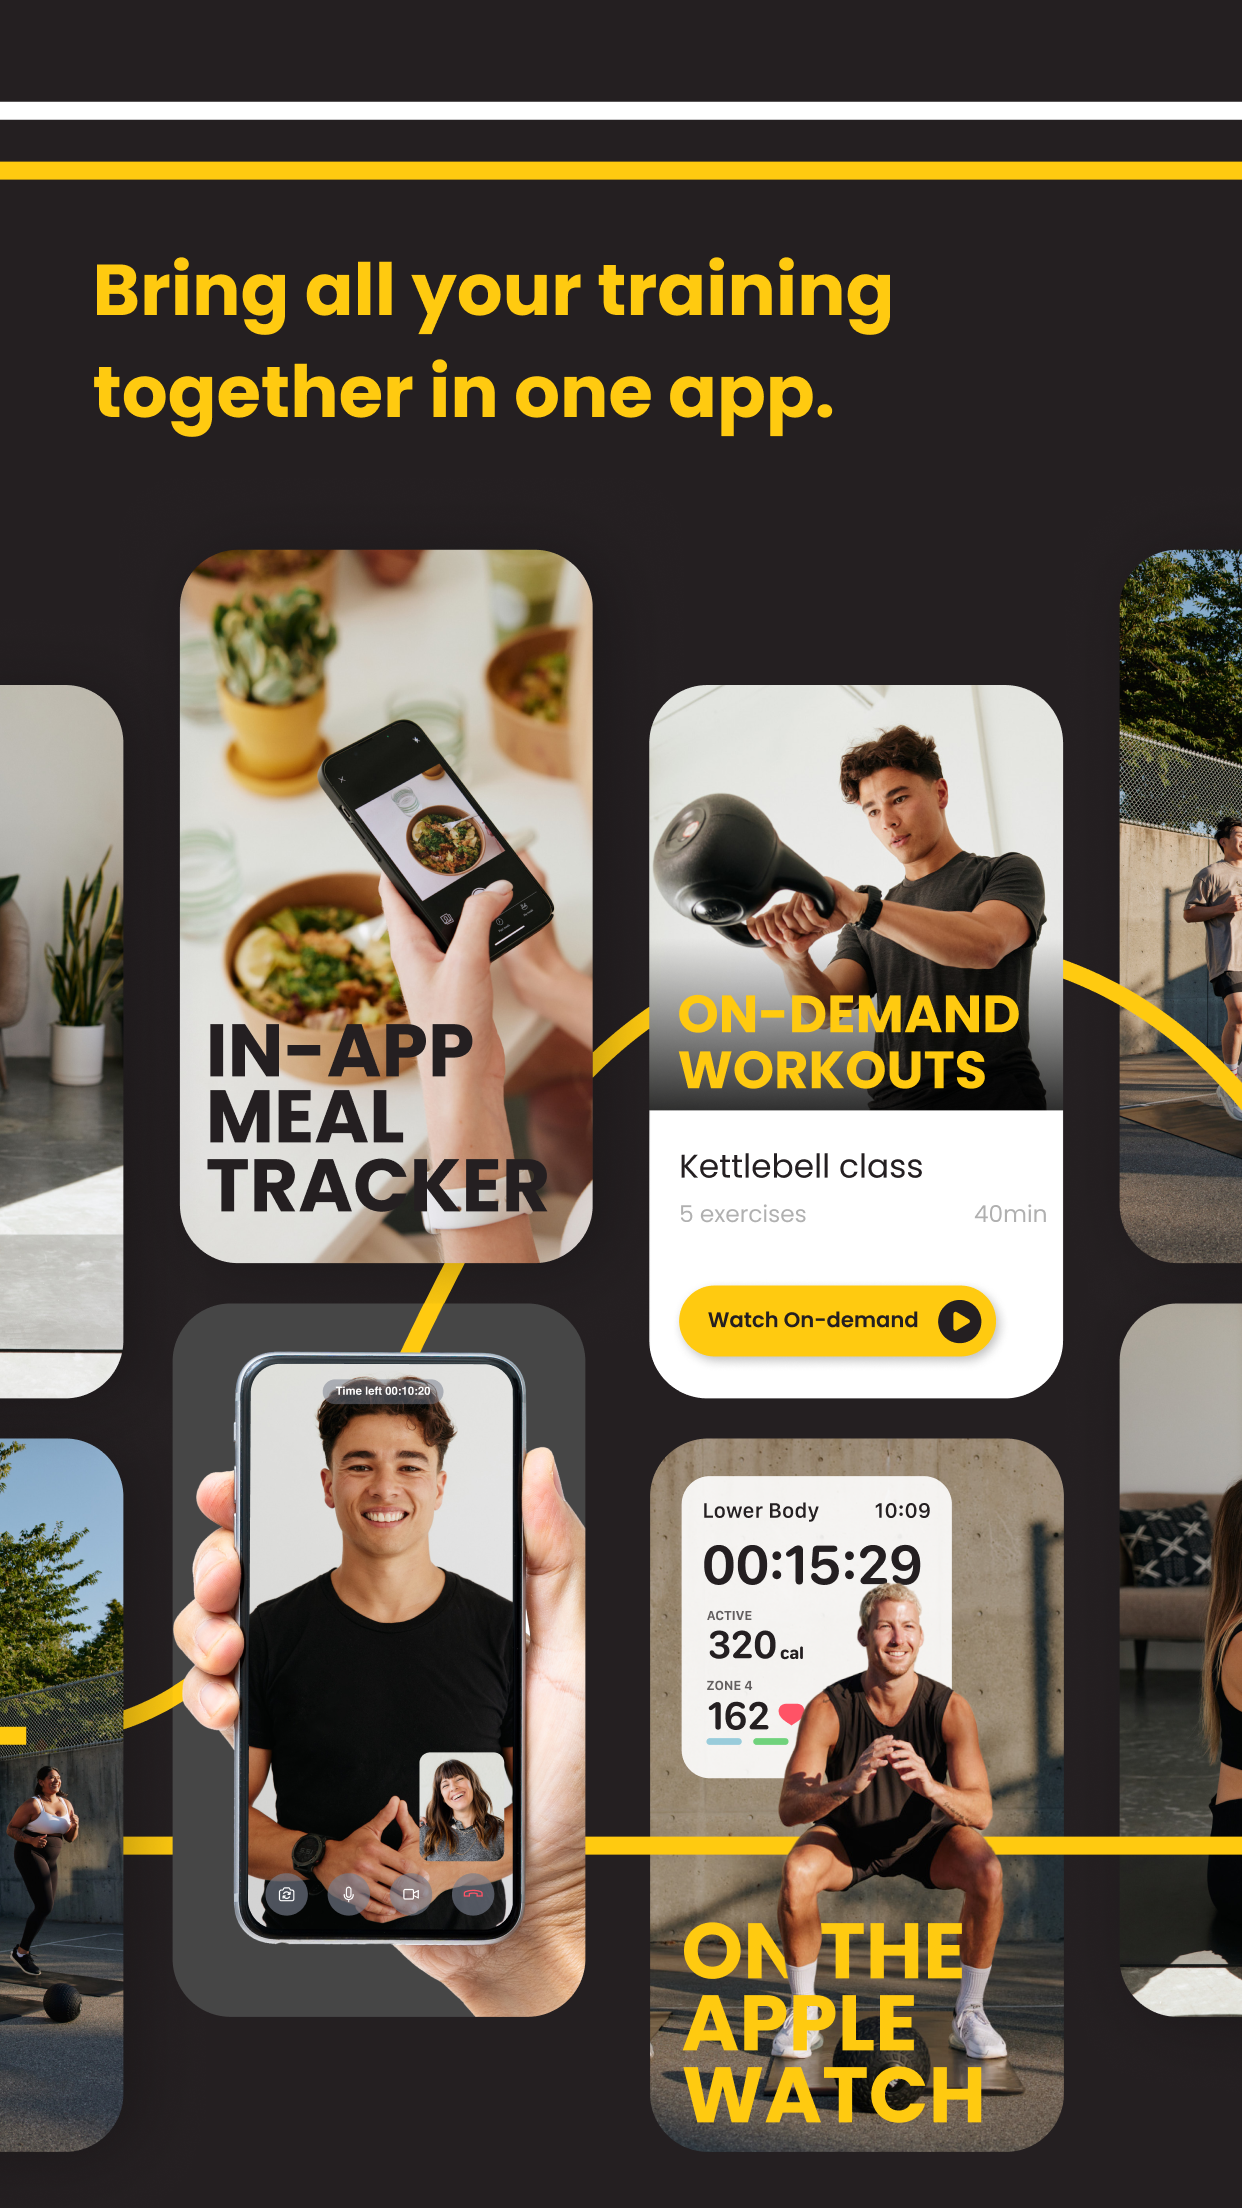 ABC Trainerize: The Total Gym Management Software. This revolutionary application is tailored for gyms, studios, personal trainers, and other fitness professionals to help grow and manage their business.